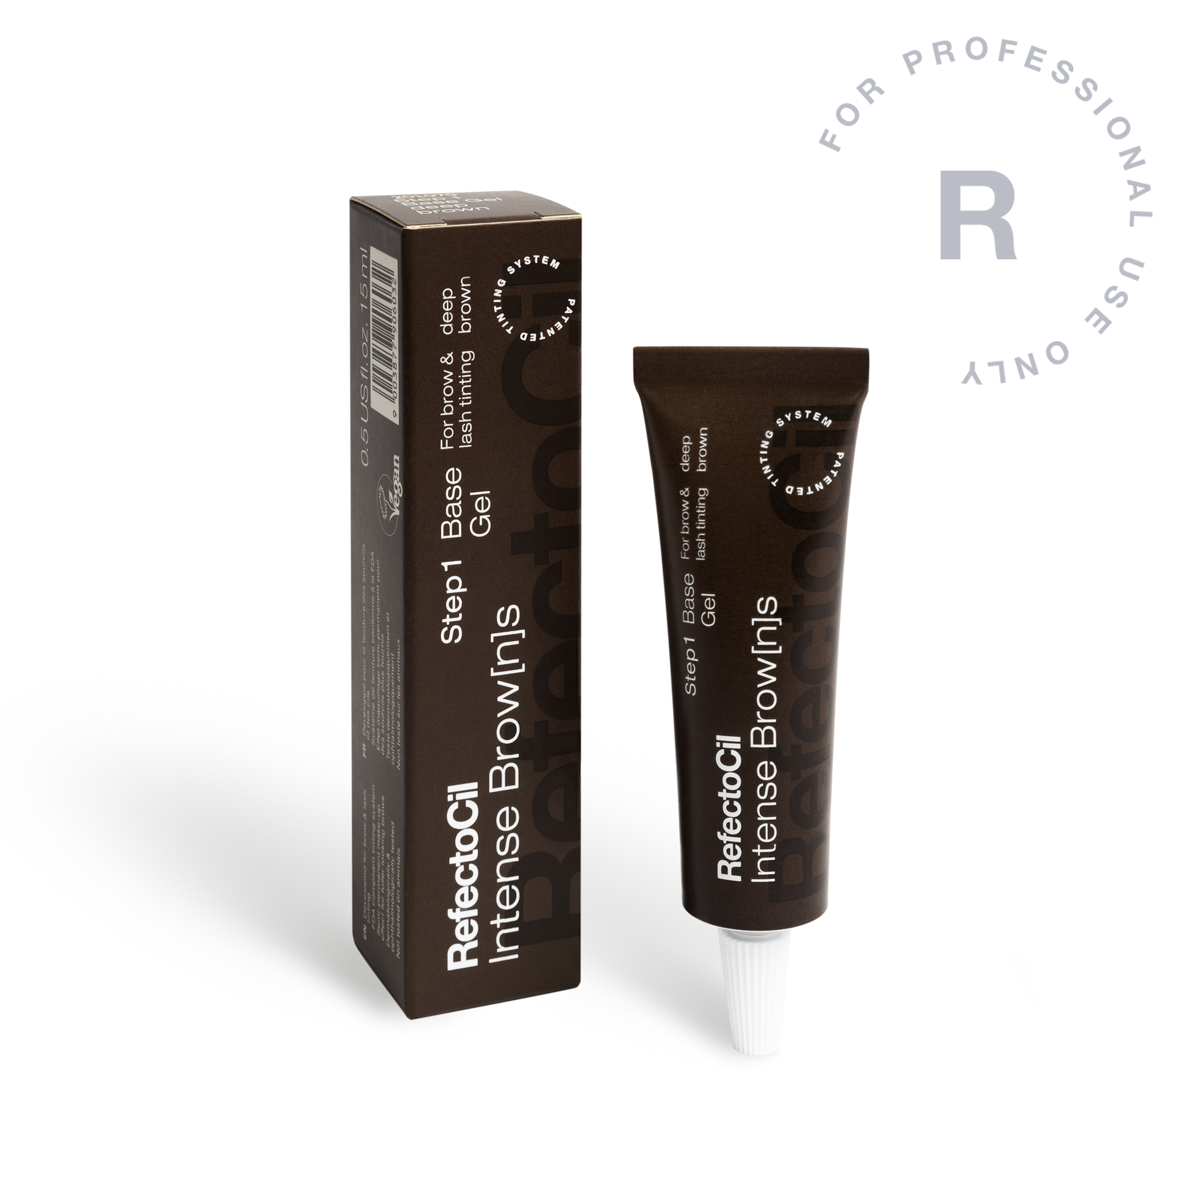 RefectoCil Intense Brow[n]s - Base Gel 15ml - Creata Beauty - Professional Beauty Products